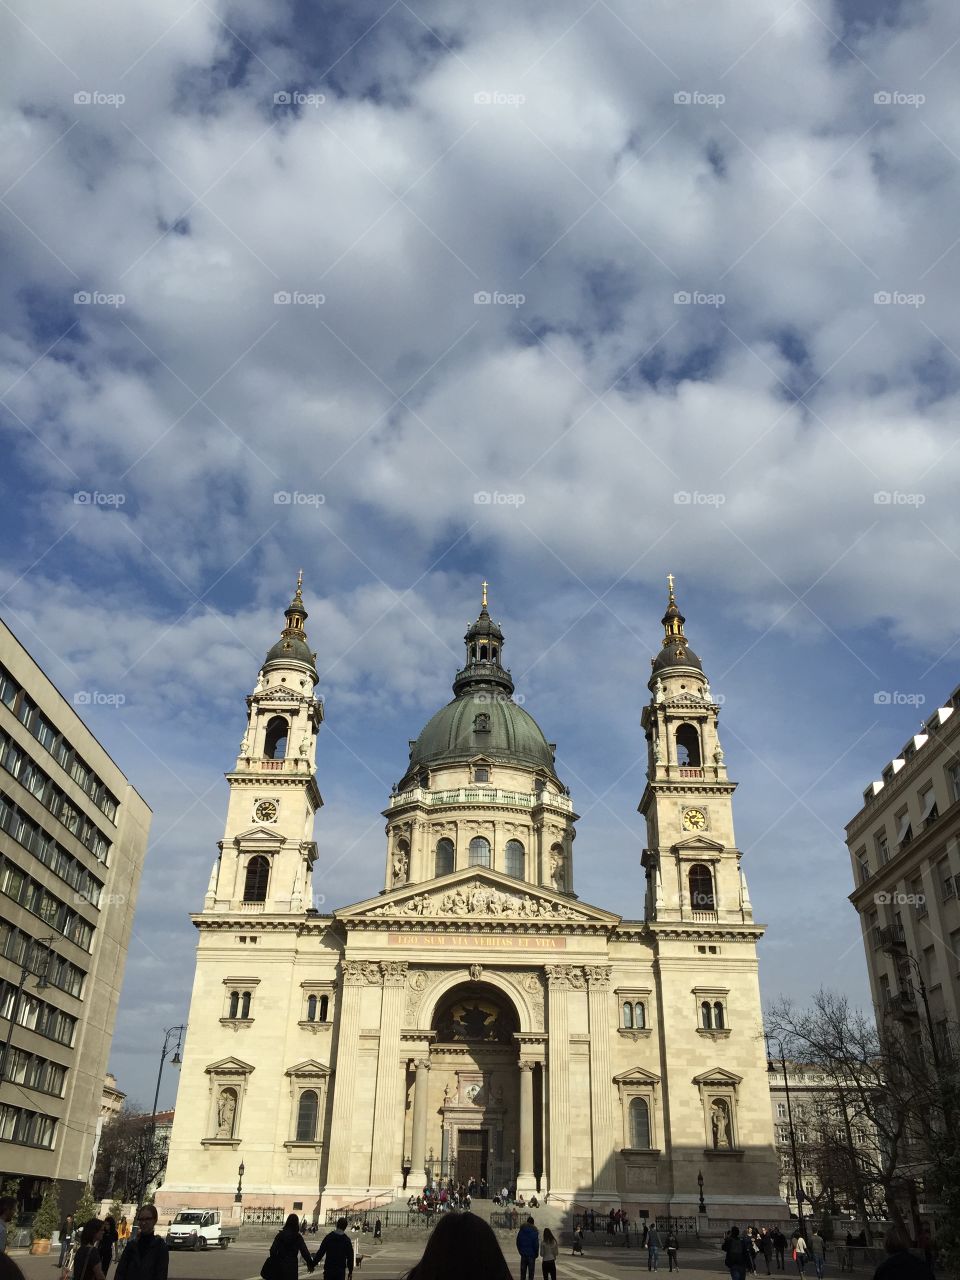 The St. Stephen's Basilica in Budapest. The photo was taken of the St. Stephen's Basilica in Budapest, Hungary.